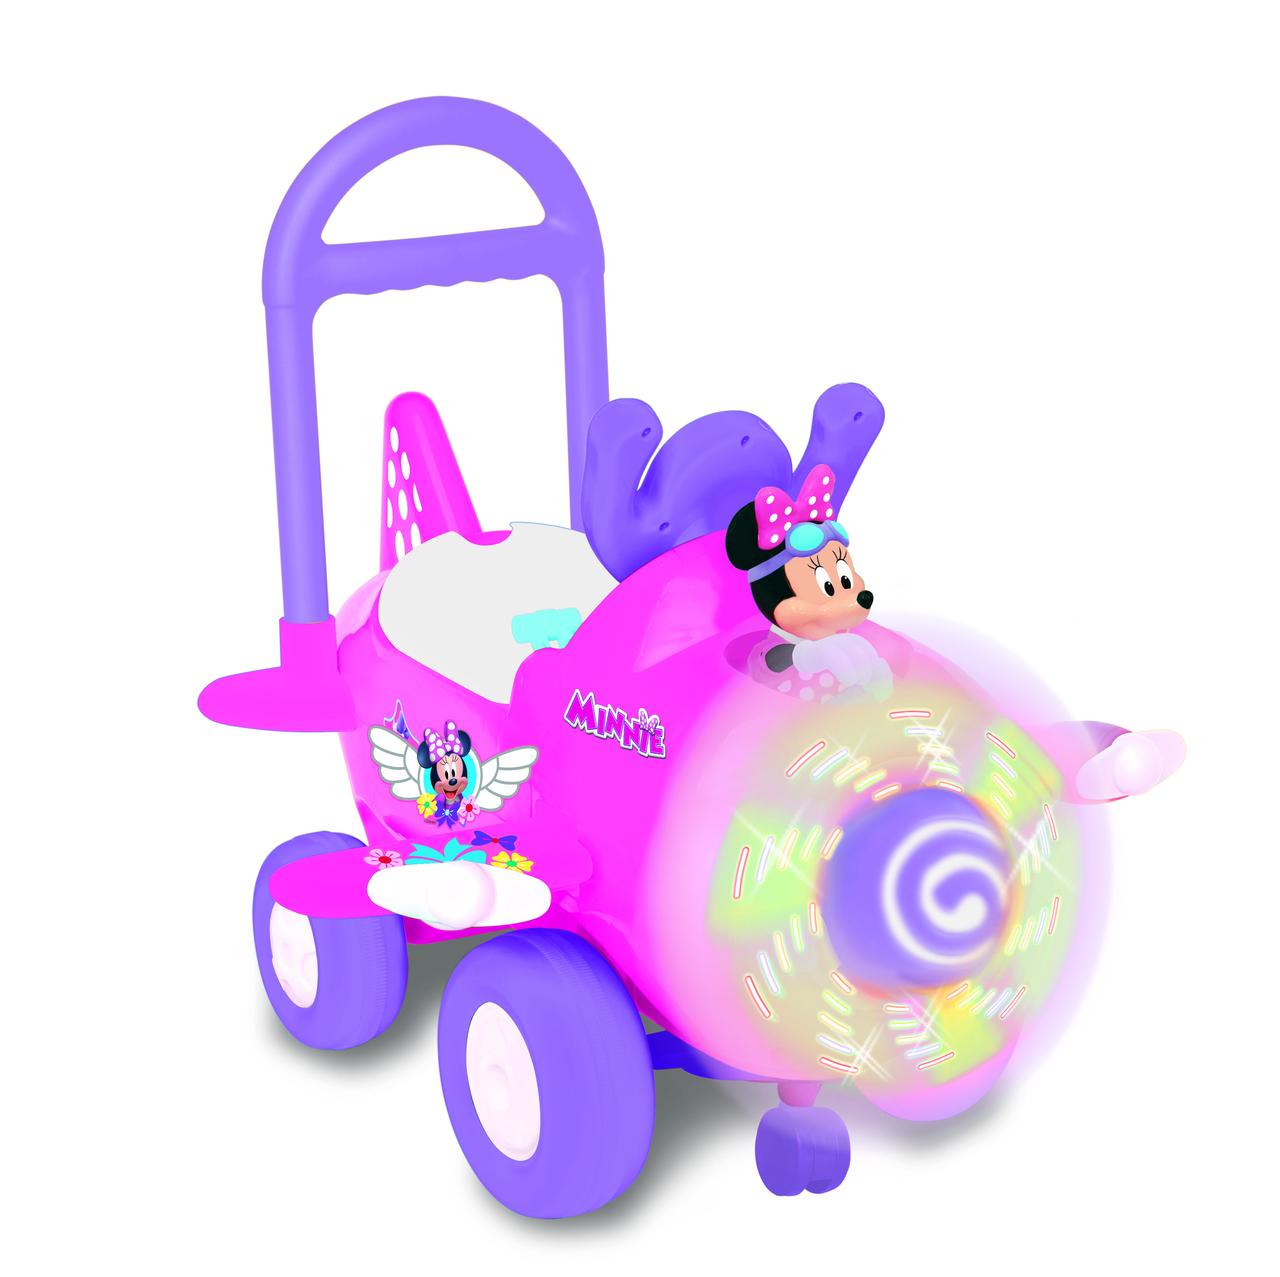 Disney Deluxe Minnie Mouse Plane Activity Ride-on with Lights and Sounds - image 1 of 8